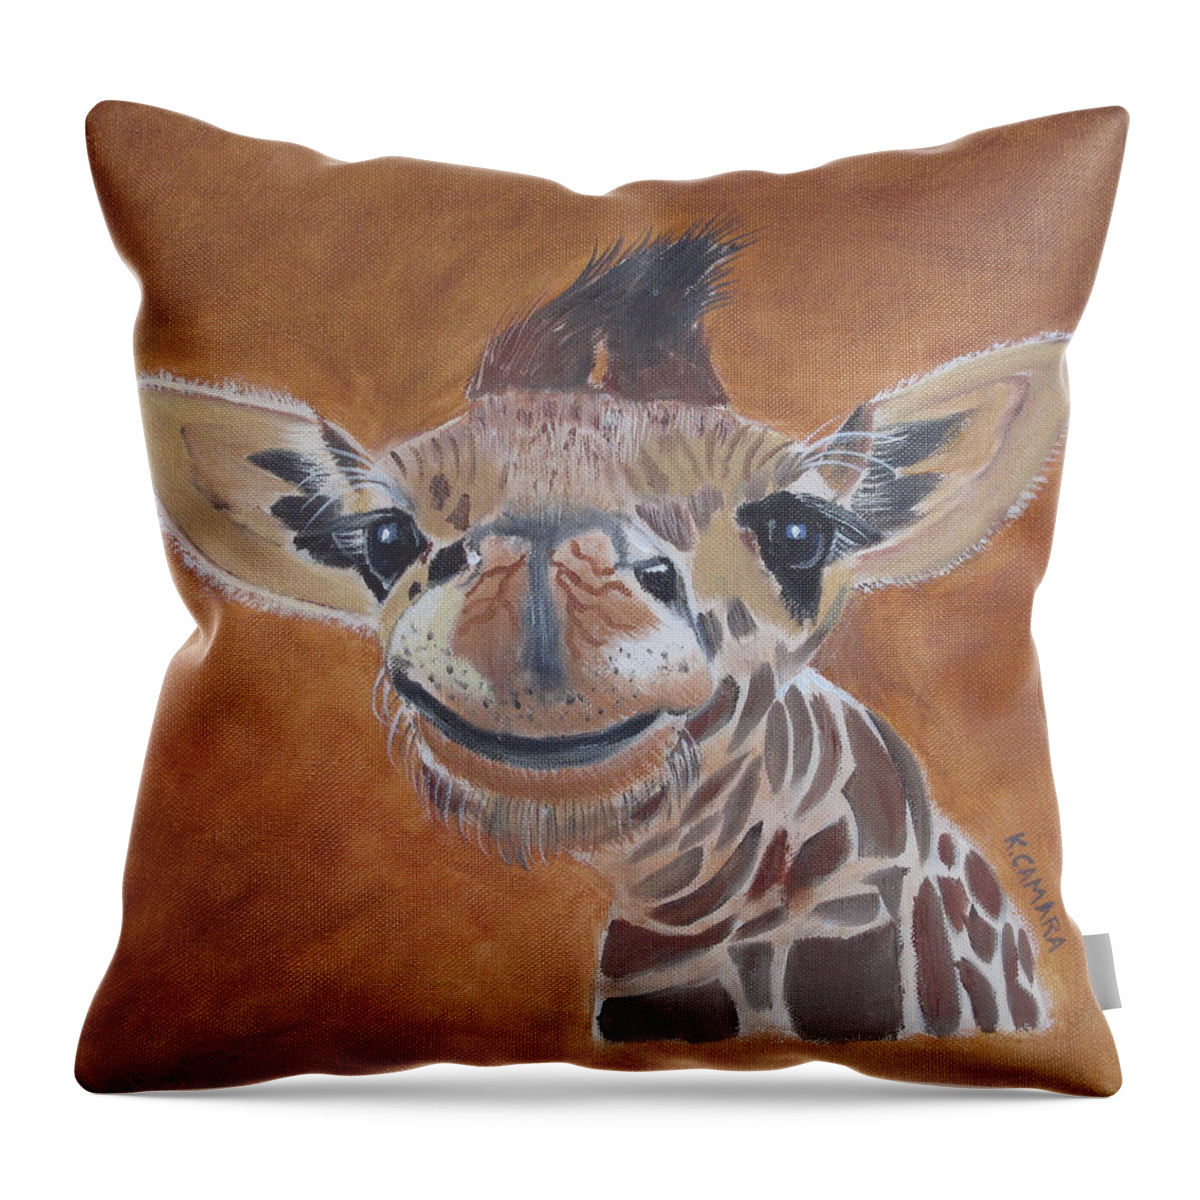 Pets Throw Pillow featuring the painting Goofy Giraffe by Kathie Camara